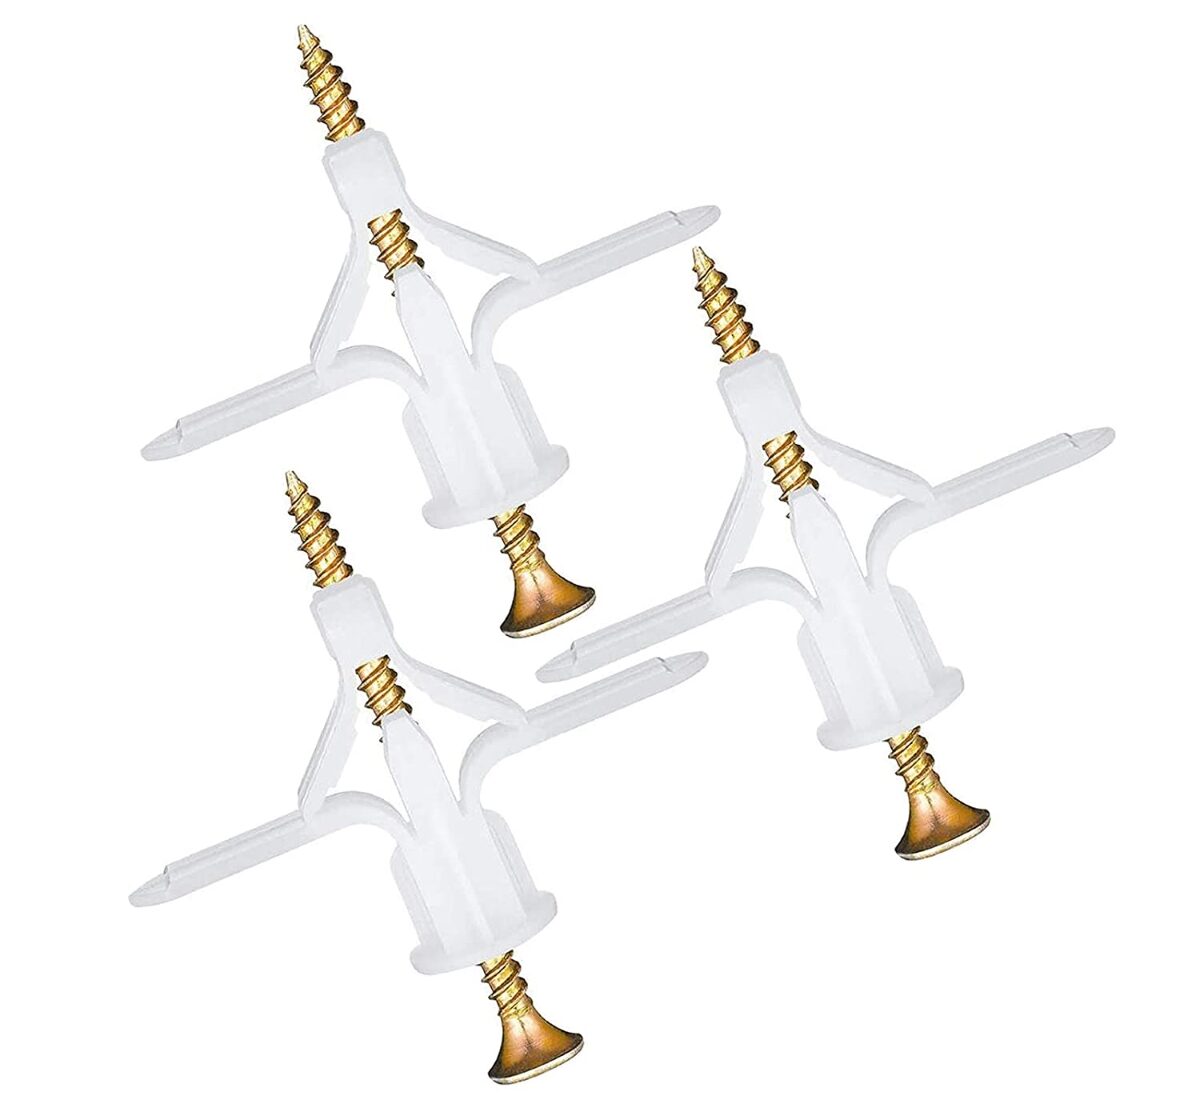 types of drywall anchors - white winged plastic anchors with screws